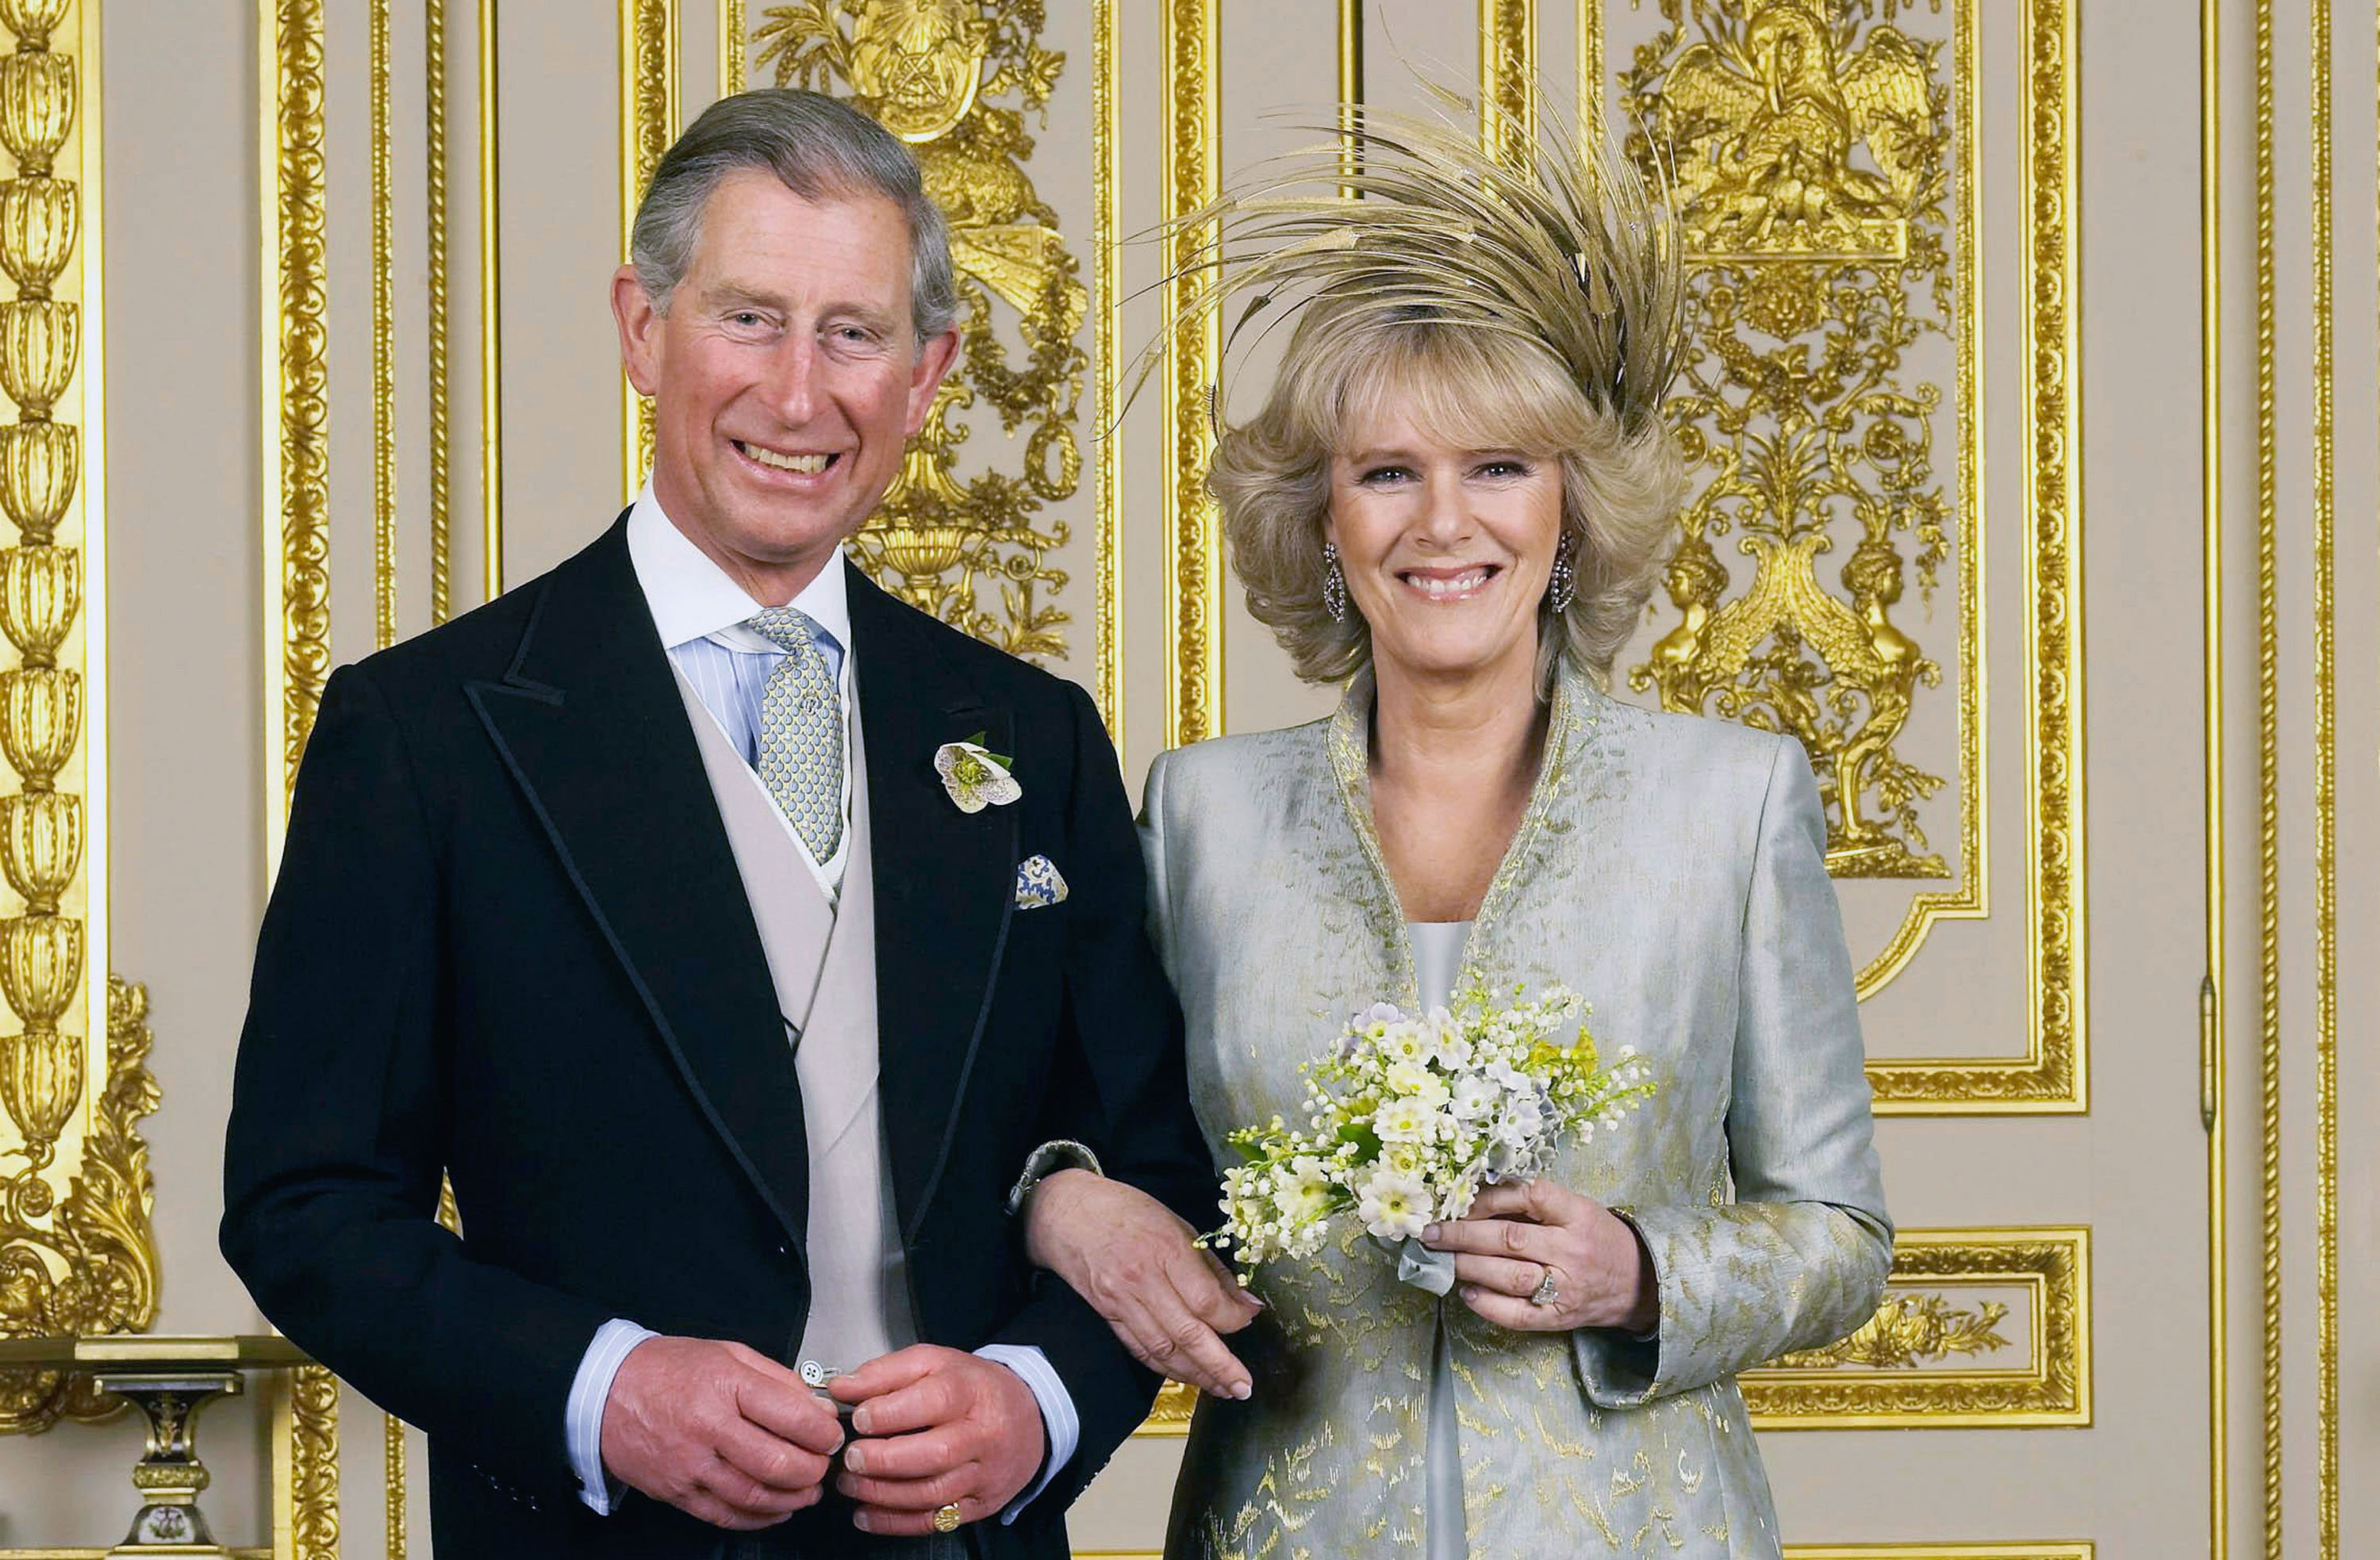 Prince Charles, the Prince of Wales, and his wife Camilla, the Duchess Of Cornwall, pose in the White Drawing Room at Windsor Castle for the Official Wedding photograph following their marriage on April 9, 2005 in Windsor, England. Tim Graham/Getty Images (Tim Graham/Getty Images)